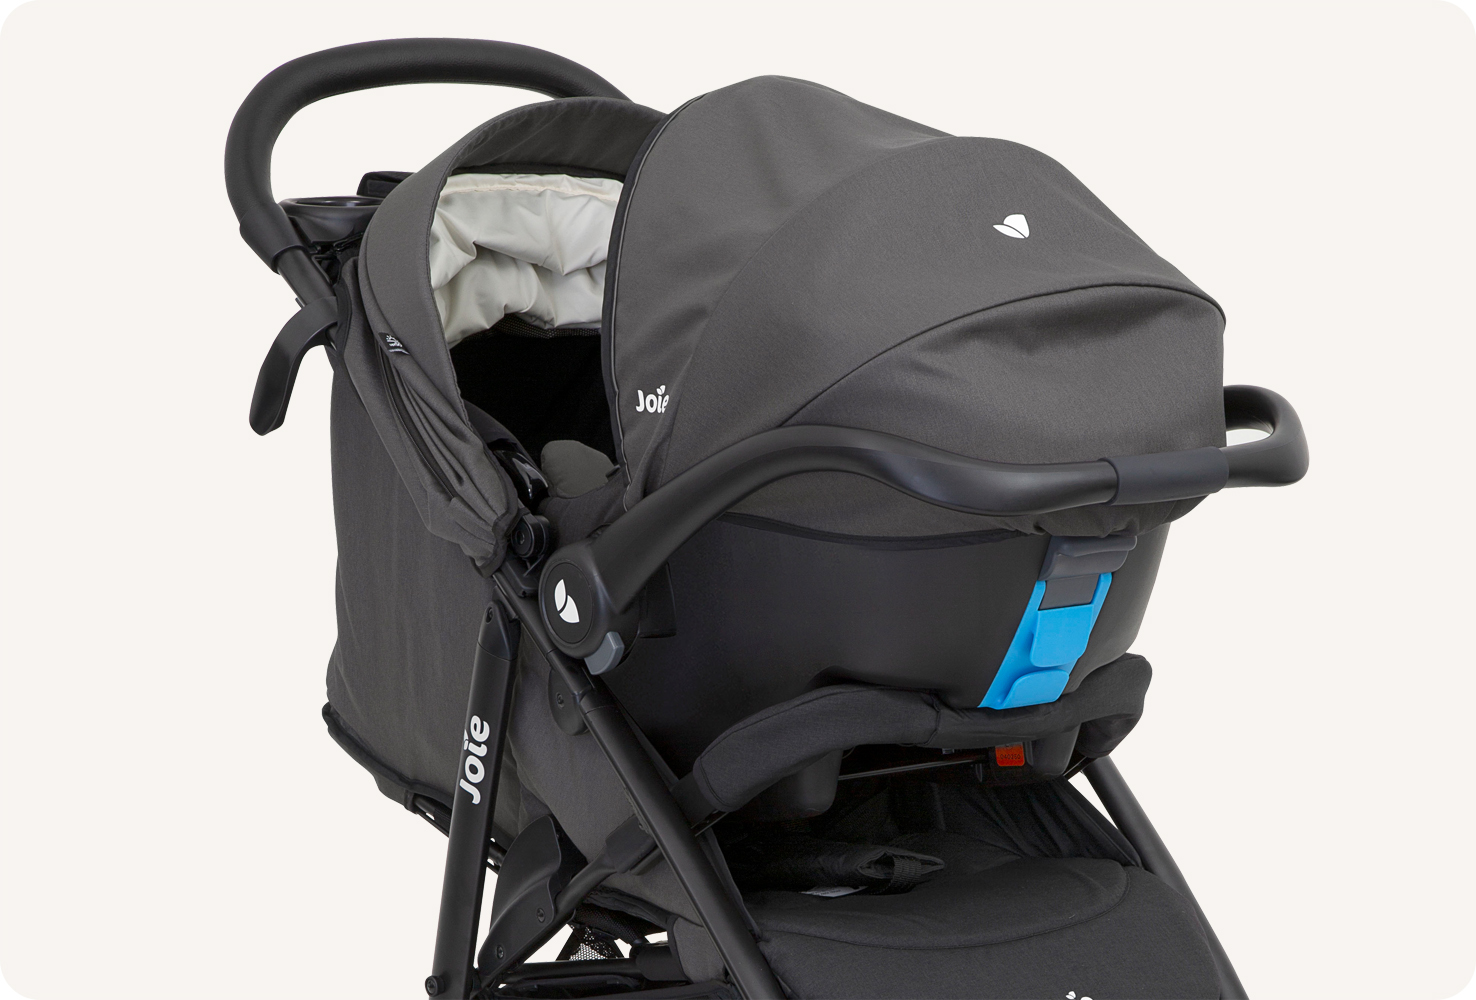  Joie litetrax 4 travel system in black with gemm infant carrier at an angle.